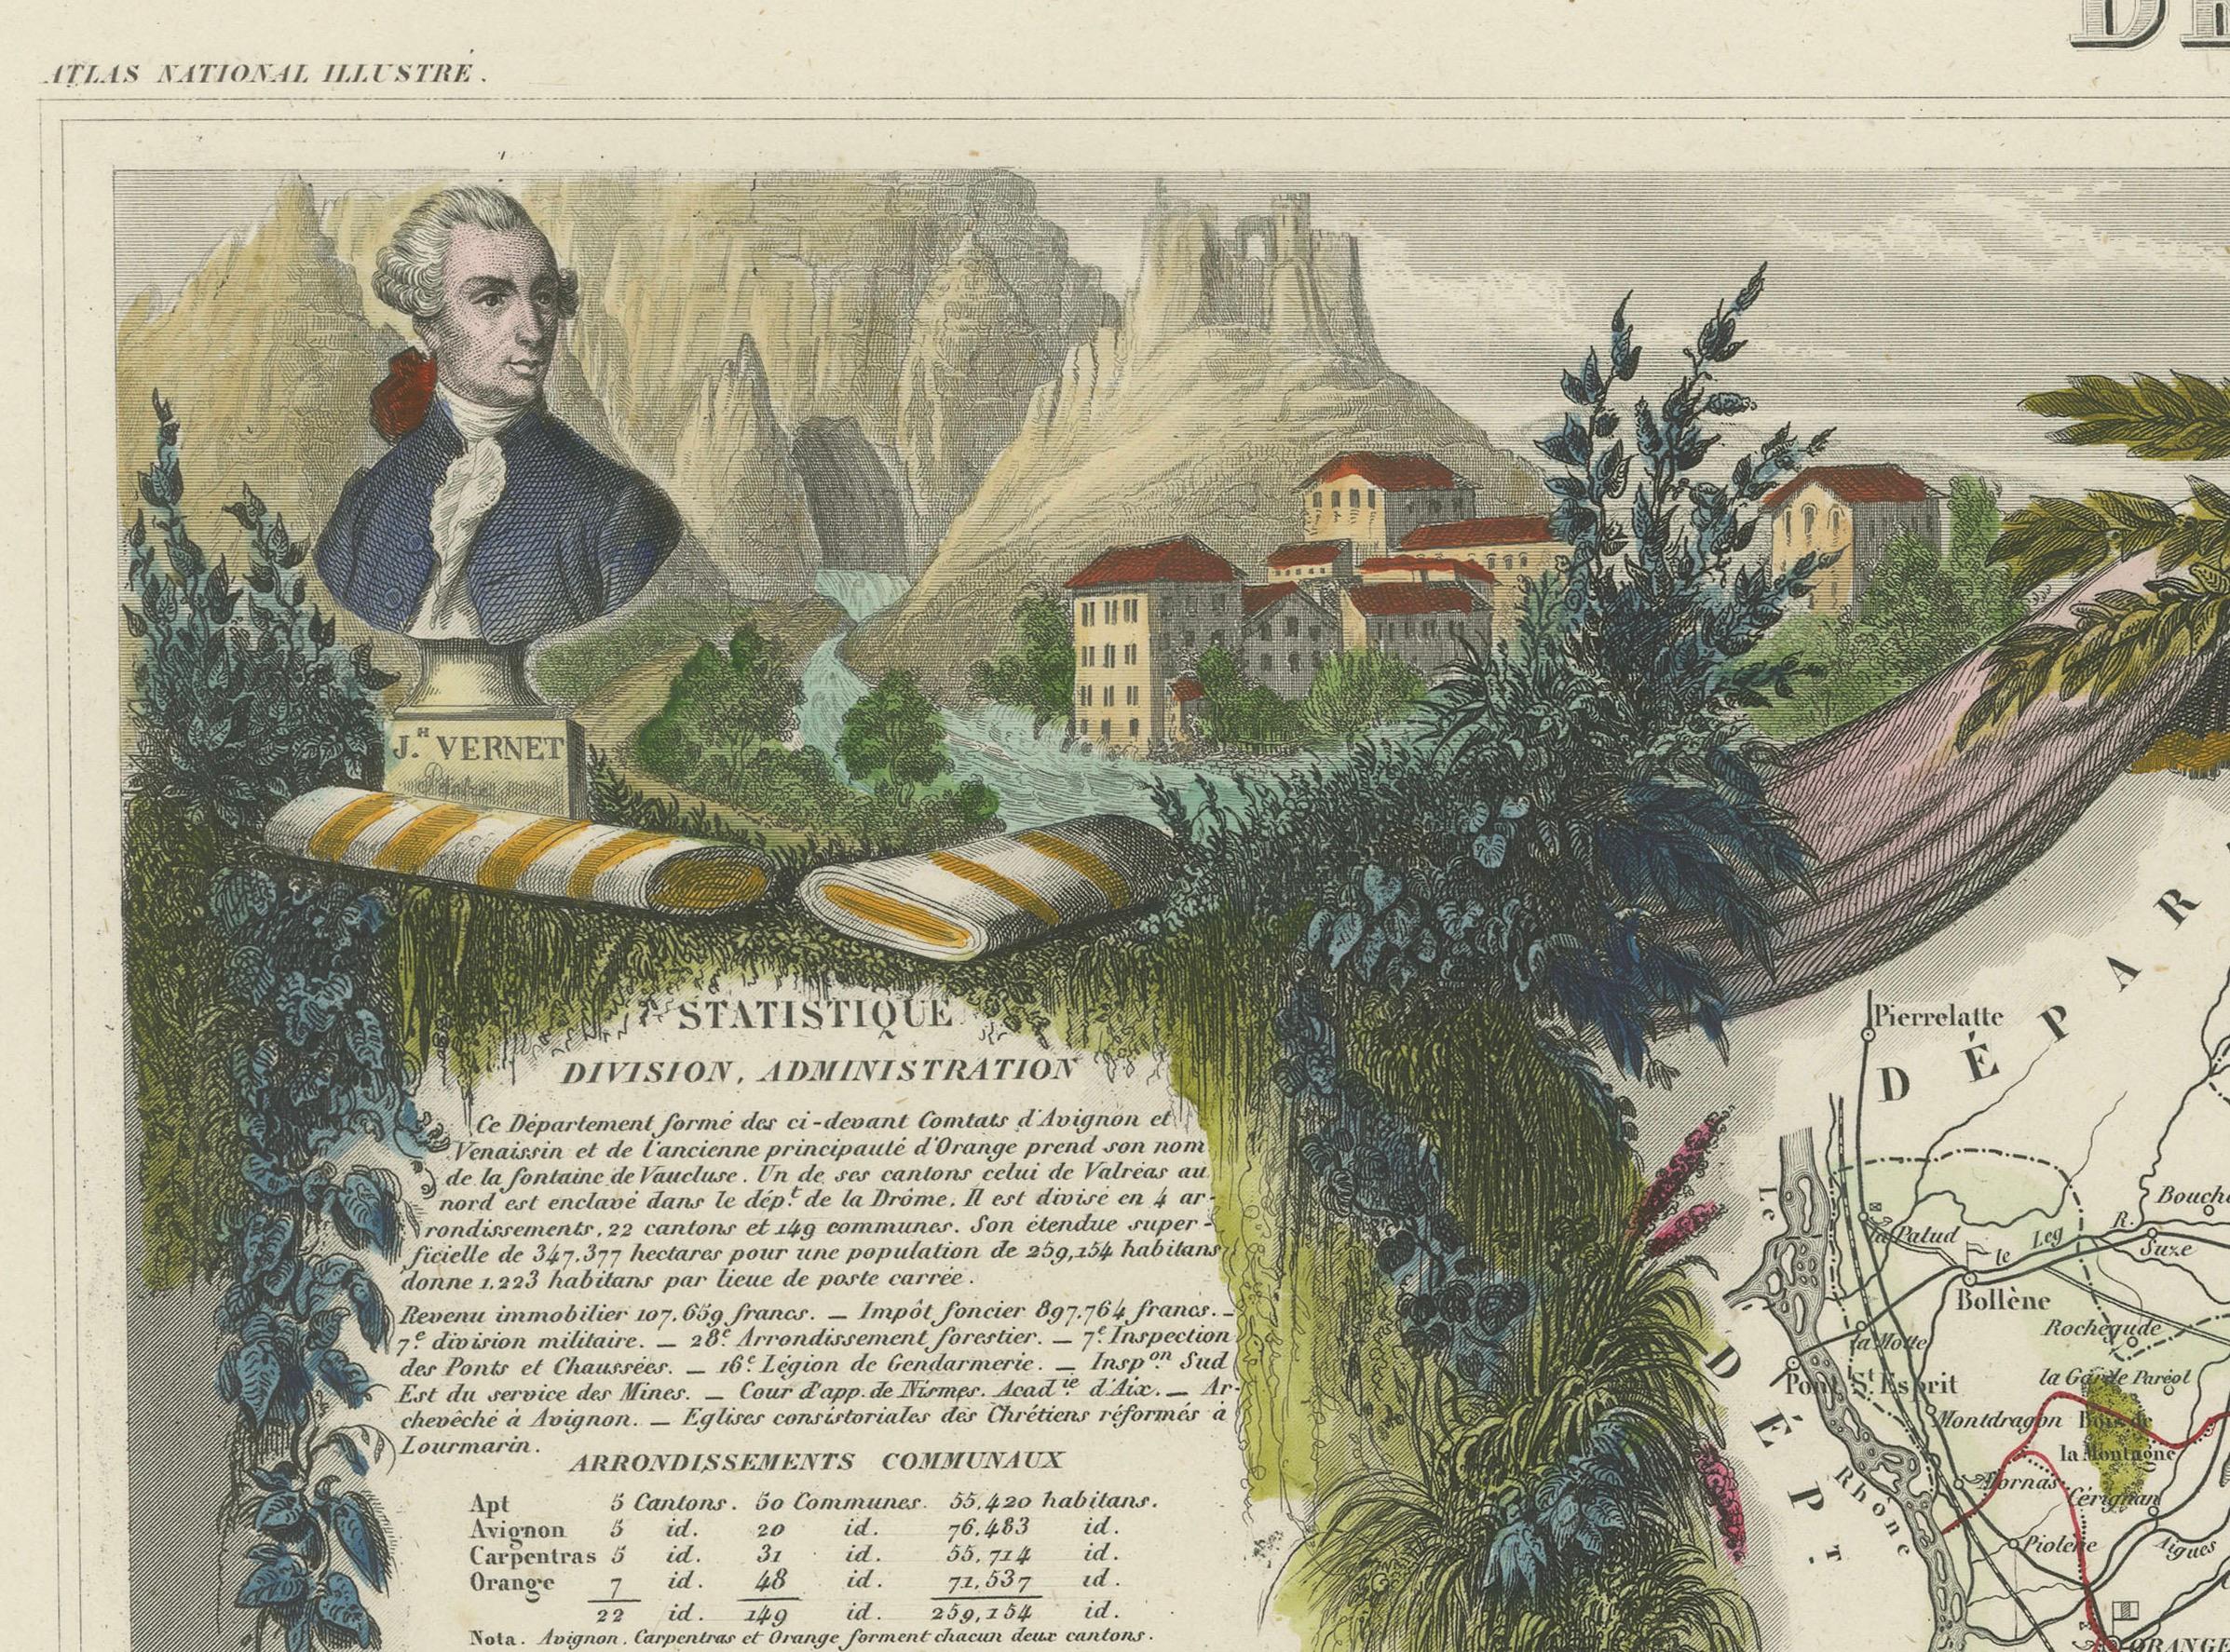 Old Map of Vaucluse, France: A Cartographic Celebration of Viticulture, 1852 For Sale 1